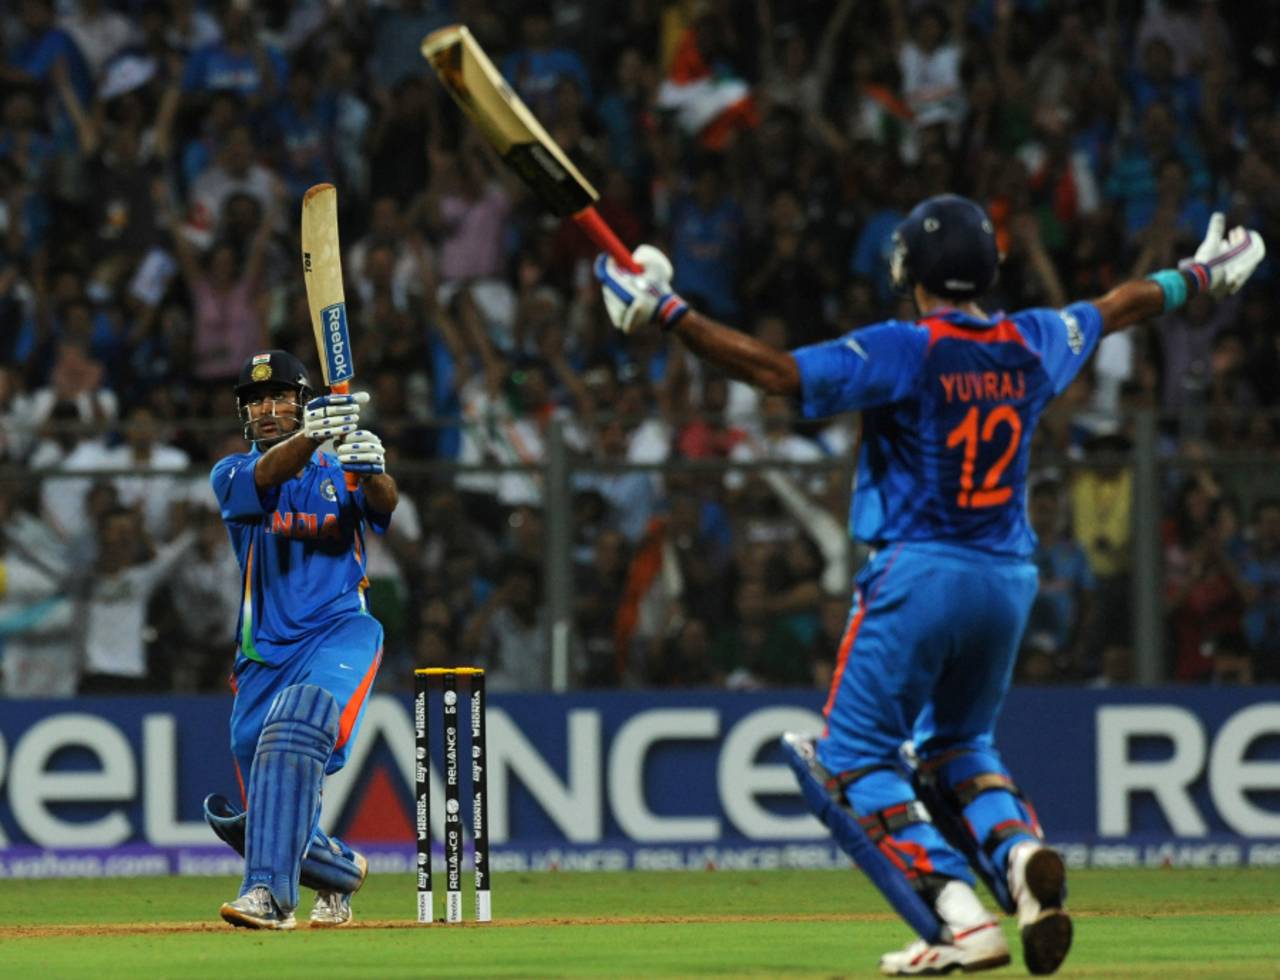 MS Dhoni watches the winning six sail over the boundary as Yuvraj Singh raises his arms in triumph, India v Sri Lanka, final, World Cup 2011, Mumbai, April 2, 2011